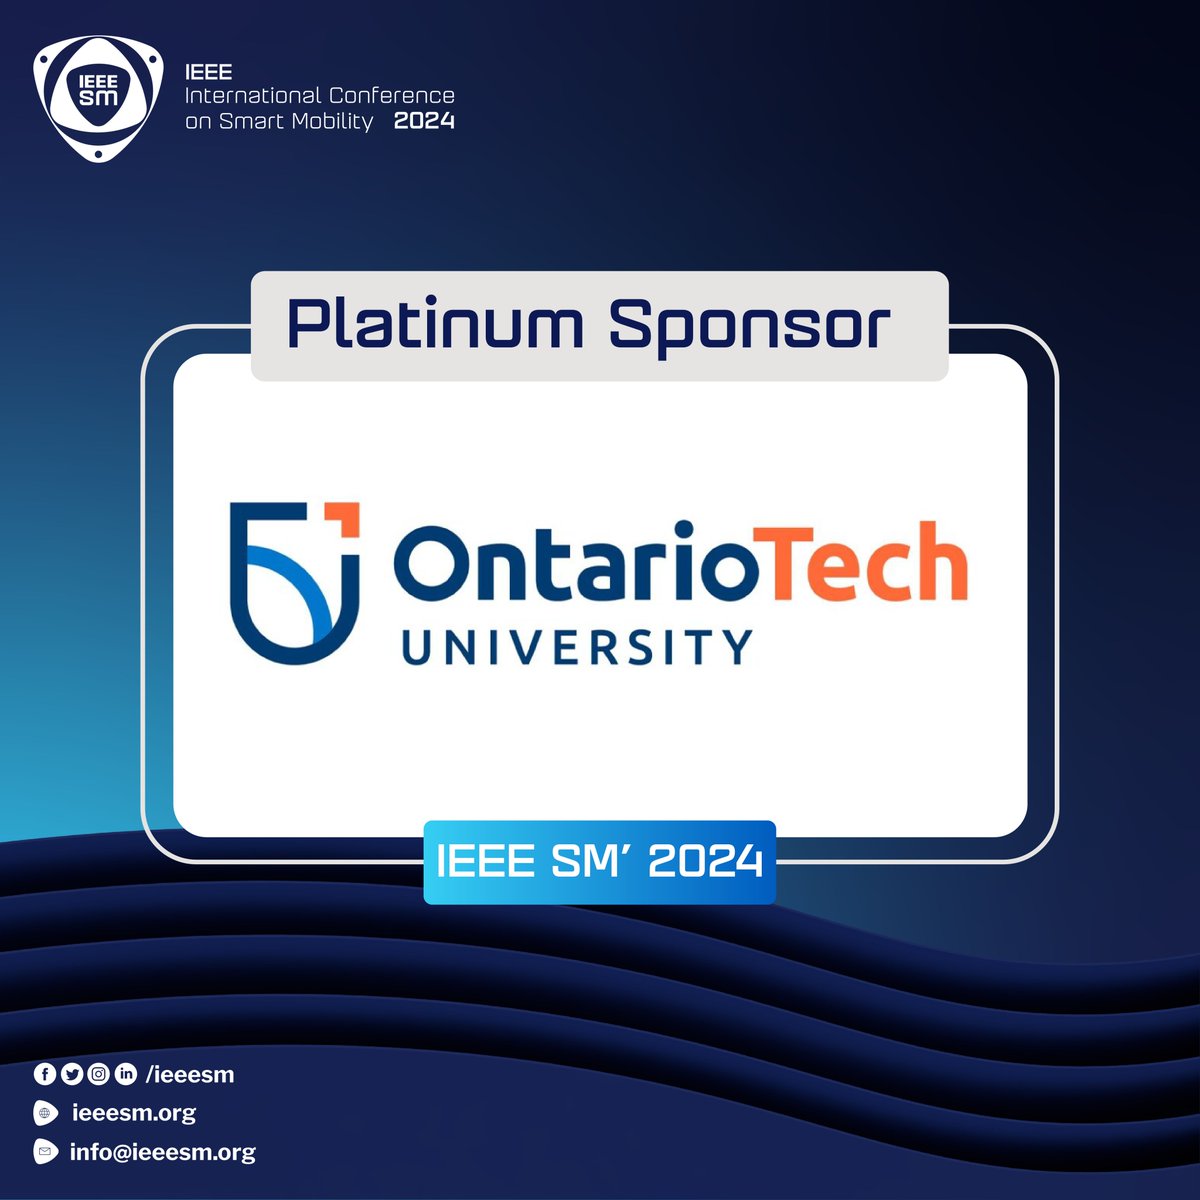 Excited to welcome Ontario Tech University as our Platinum Sponsor for the 2024 IEEE SM! Get ready for groundbreaking insights and activities between September 16 -18, 2024 at Crowne Plaza Niagara Falls-Falls view, Ontario, Canada. #Smart #Mobility #IEEESM #OntarioTech